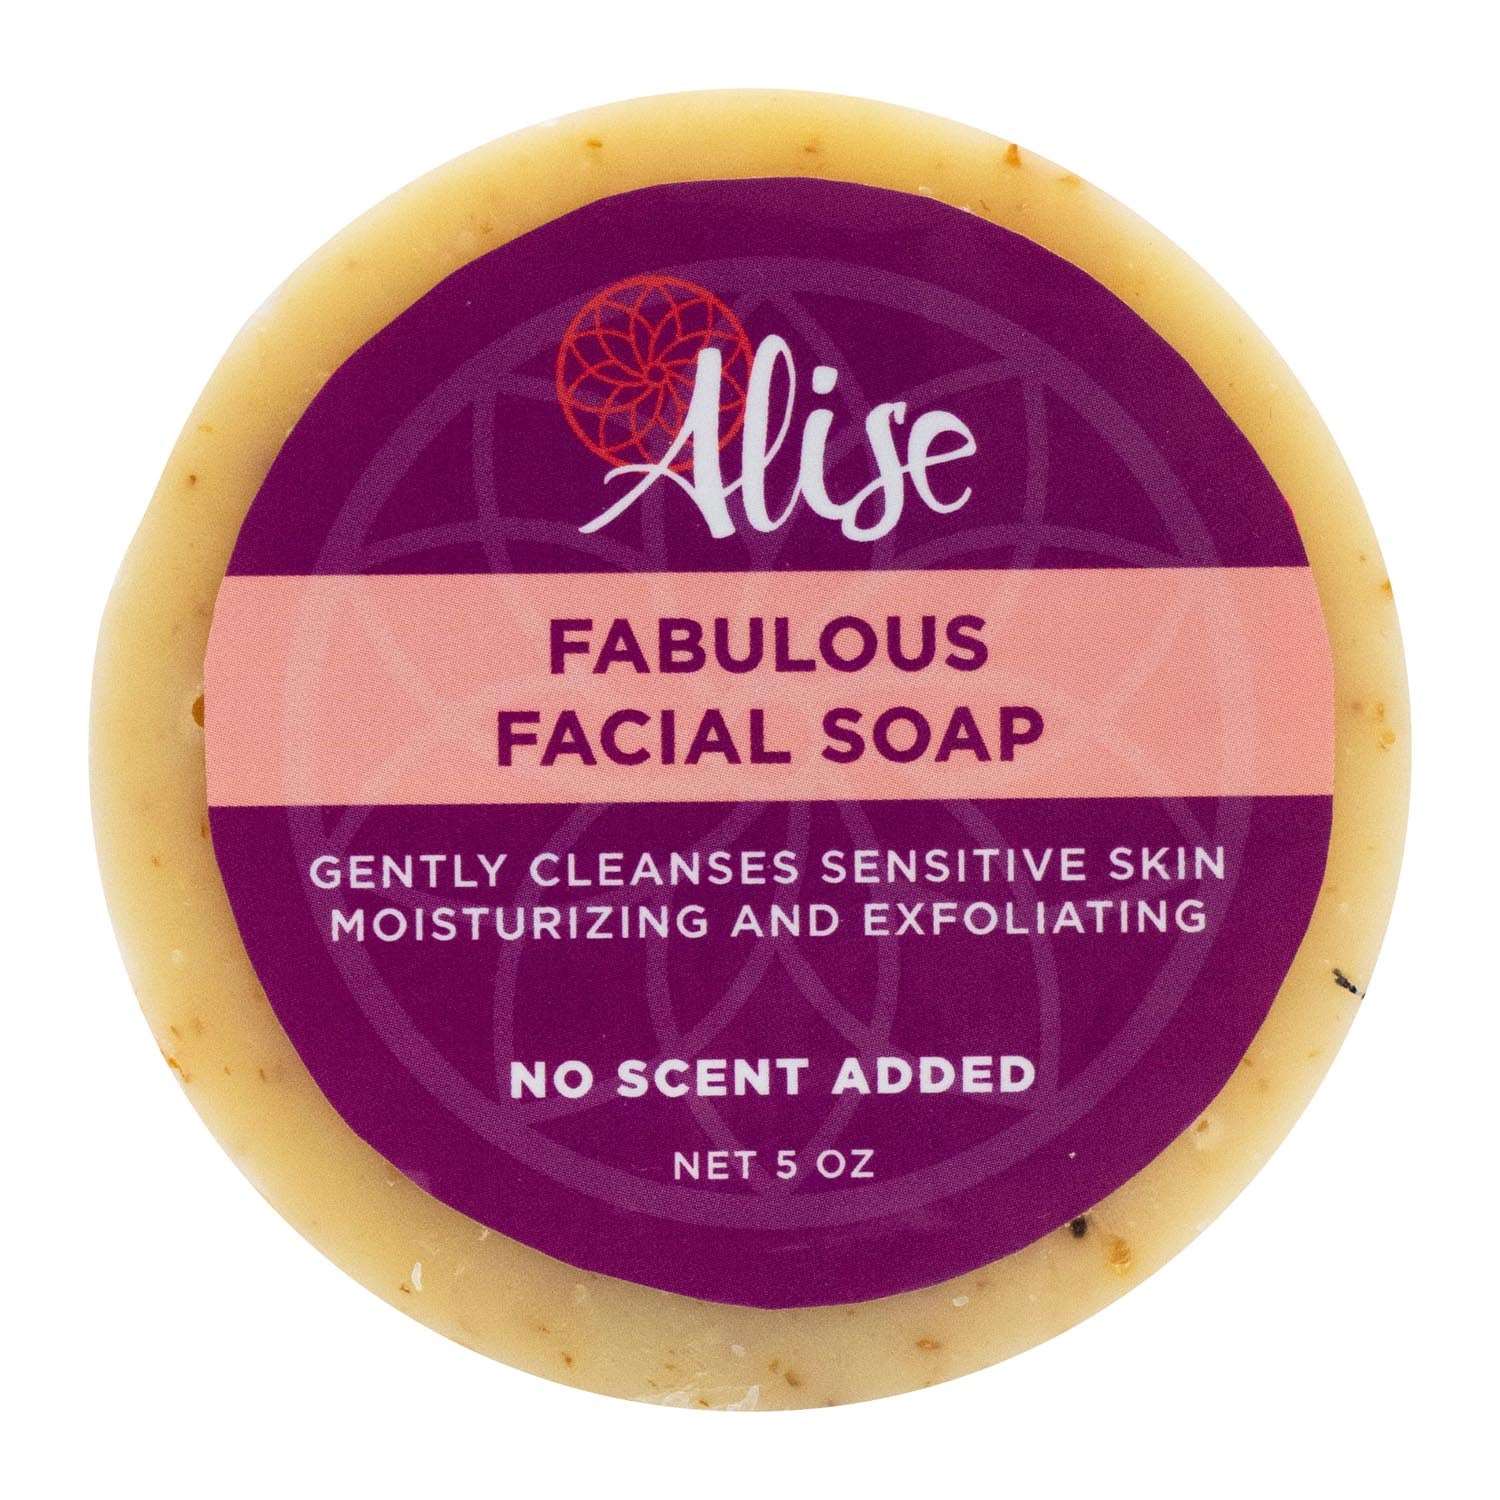 Fabulous Facial Soap 5oz handcrafted by Alise Body Care